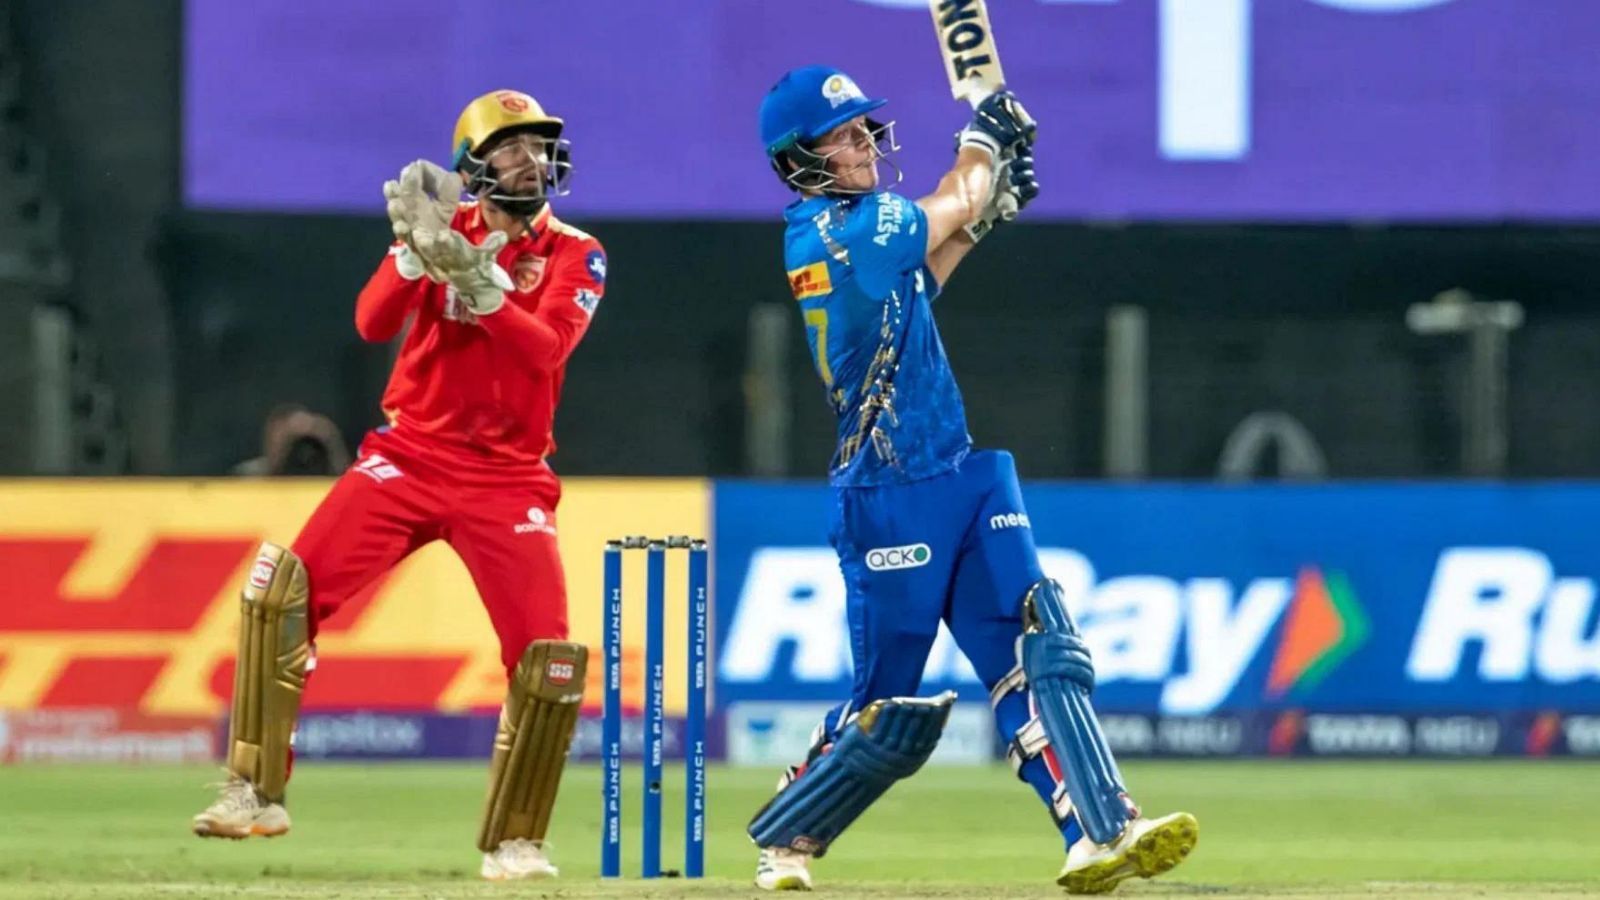 Brevis has been impressive for the Mumbai Indians in the IPL